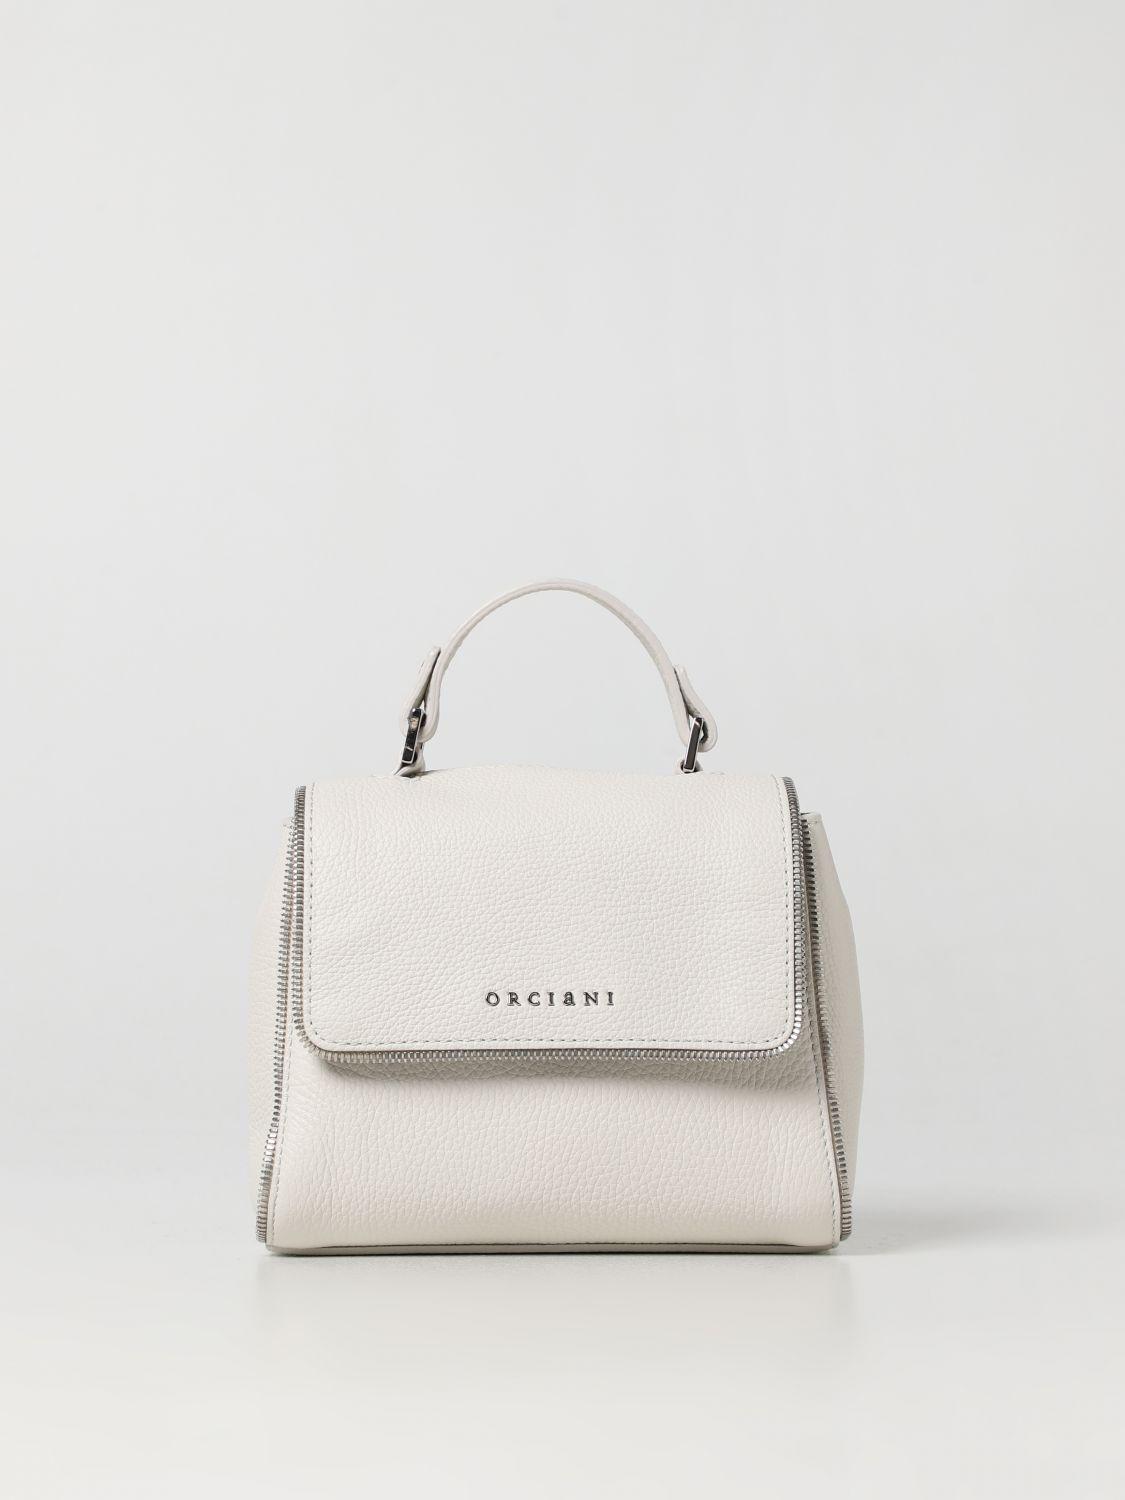 Orciani Mini Bag in Natural | Lyst